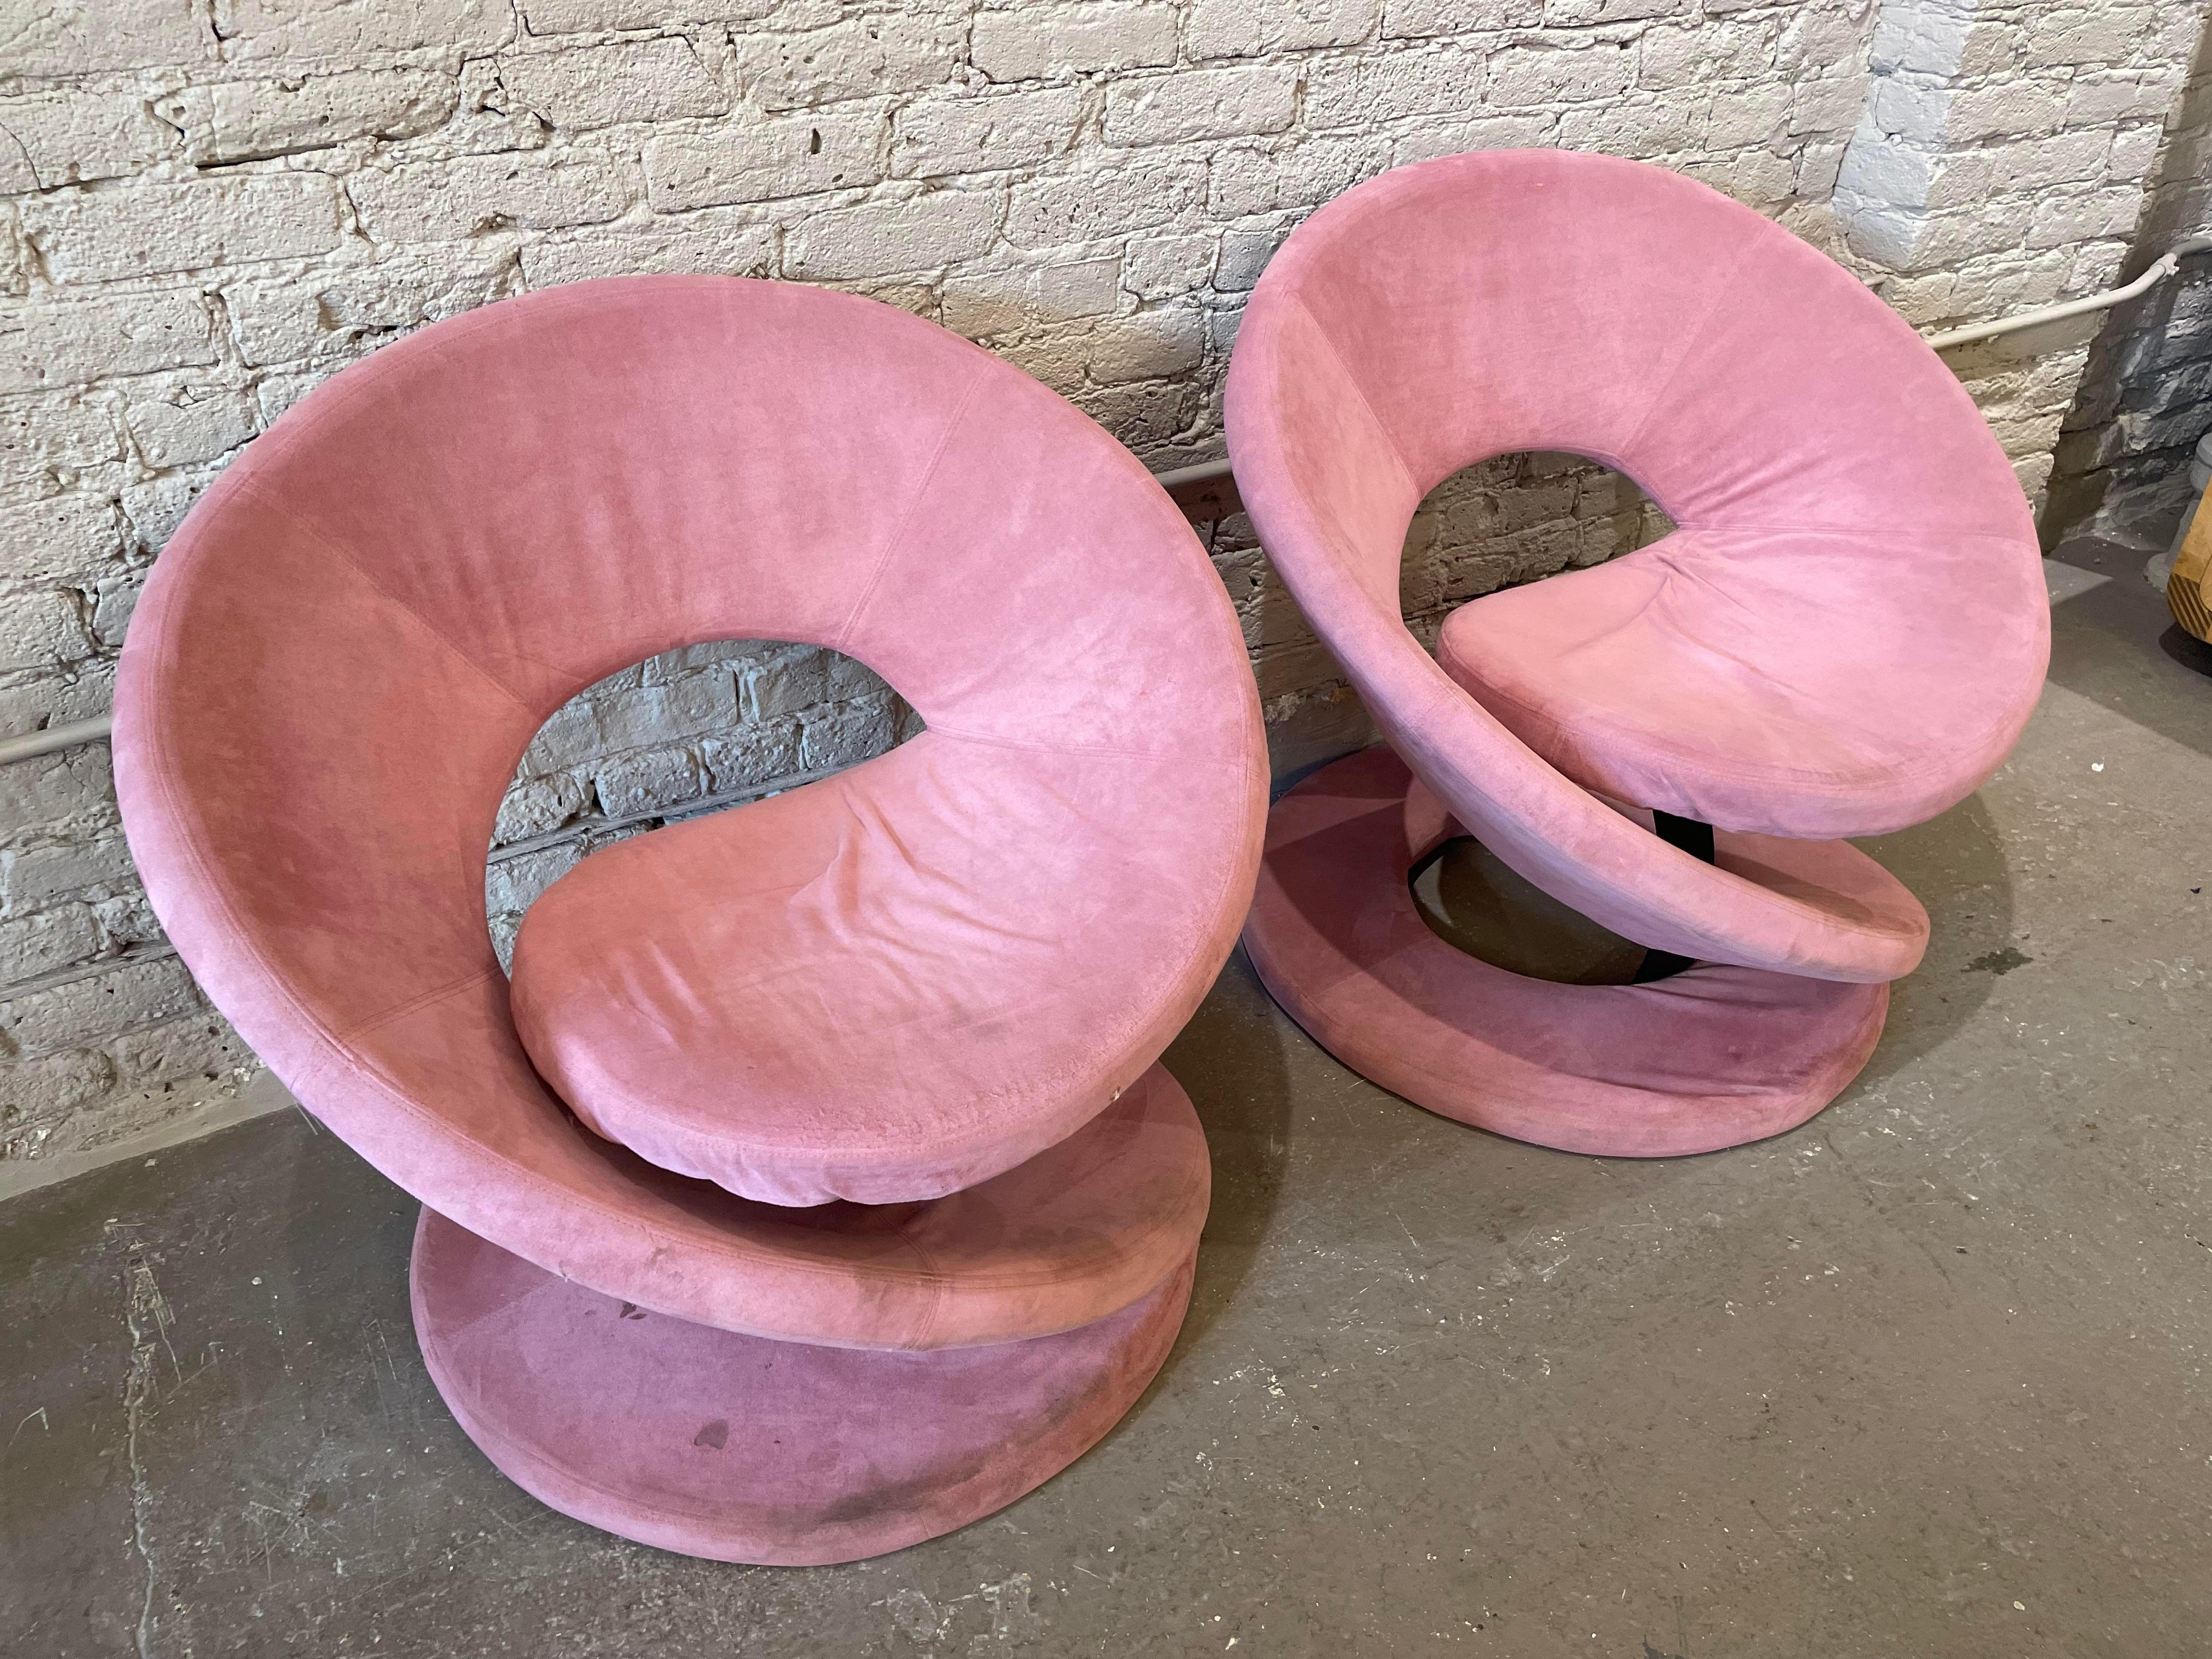 1980s Postmodern Corkscrew Chairs Attributed to Quebec 69 Jaymar - a Pair For Sale 1